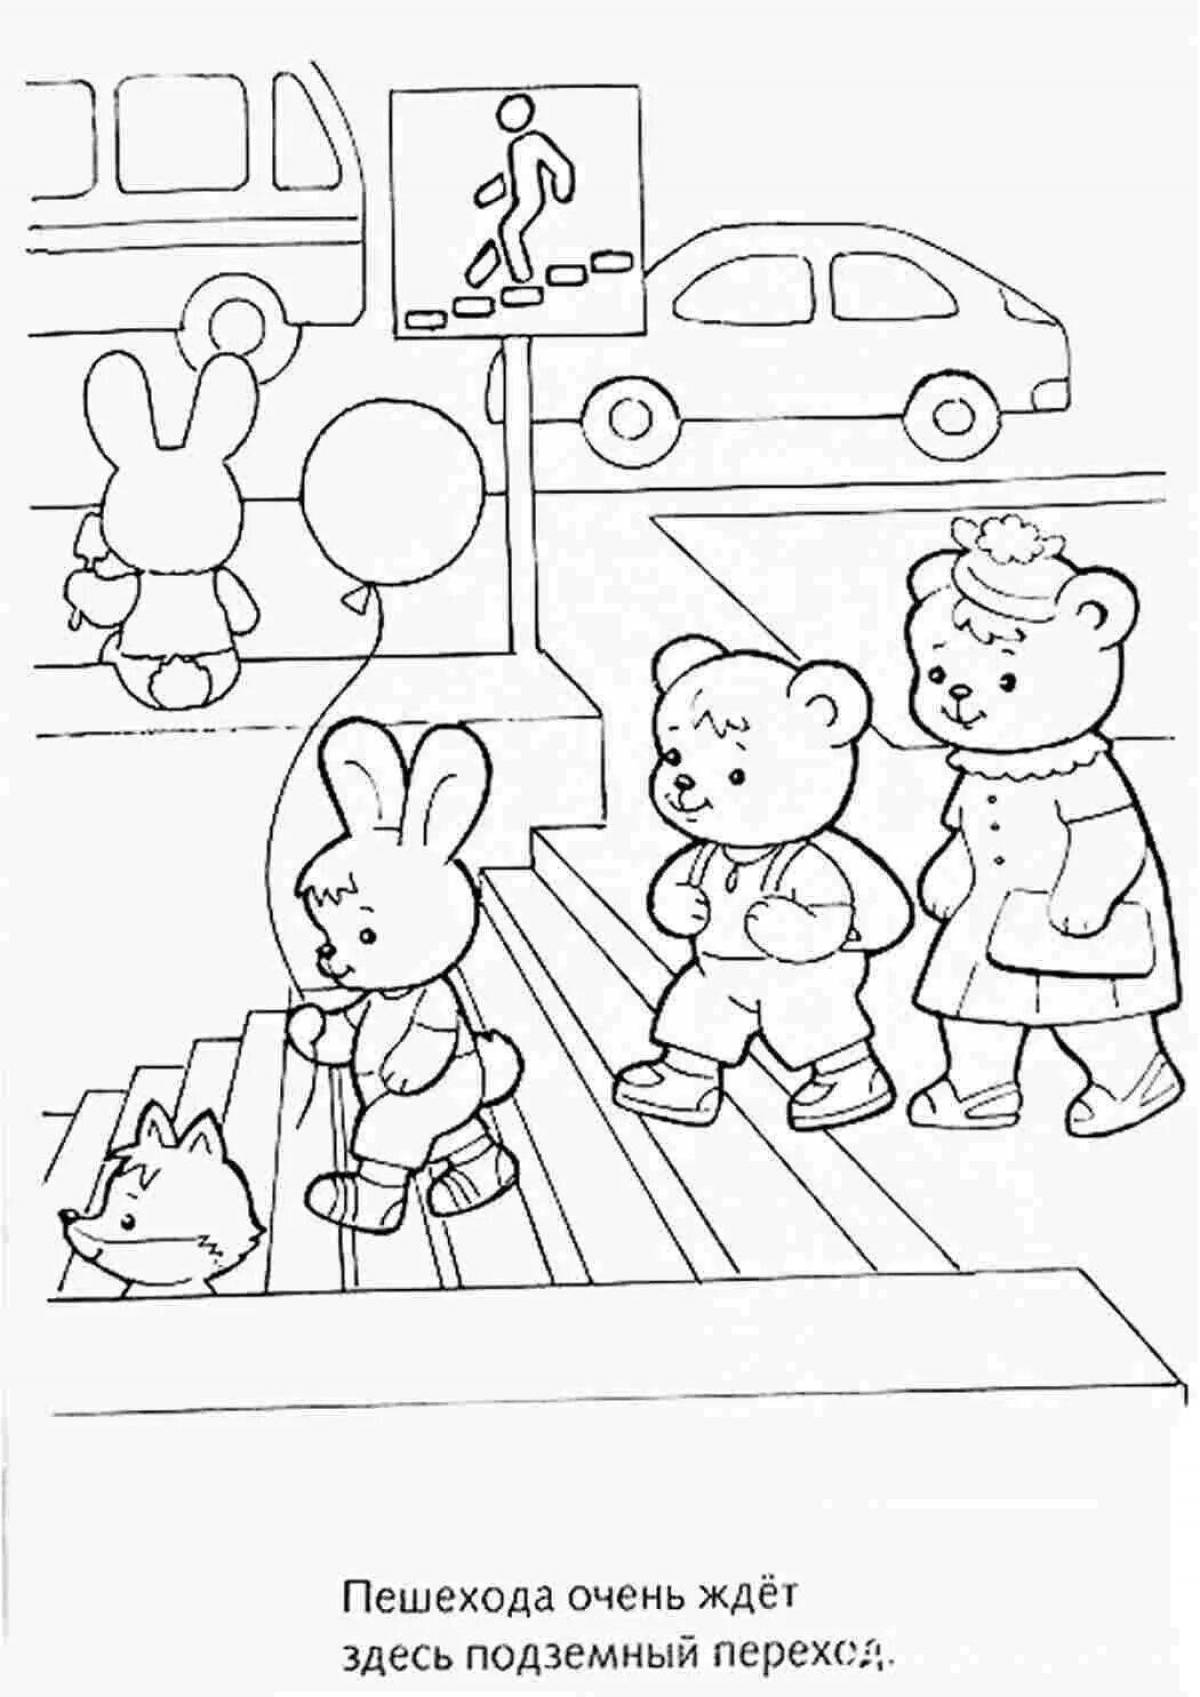 Traffic safety information coloring page